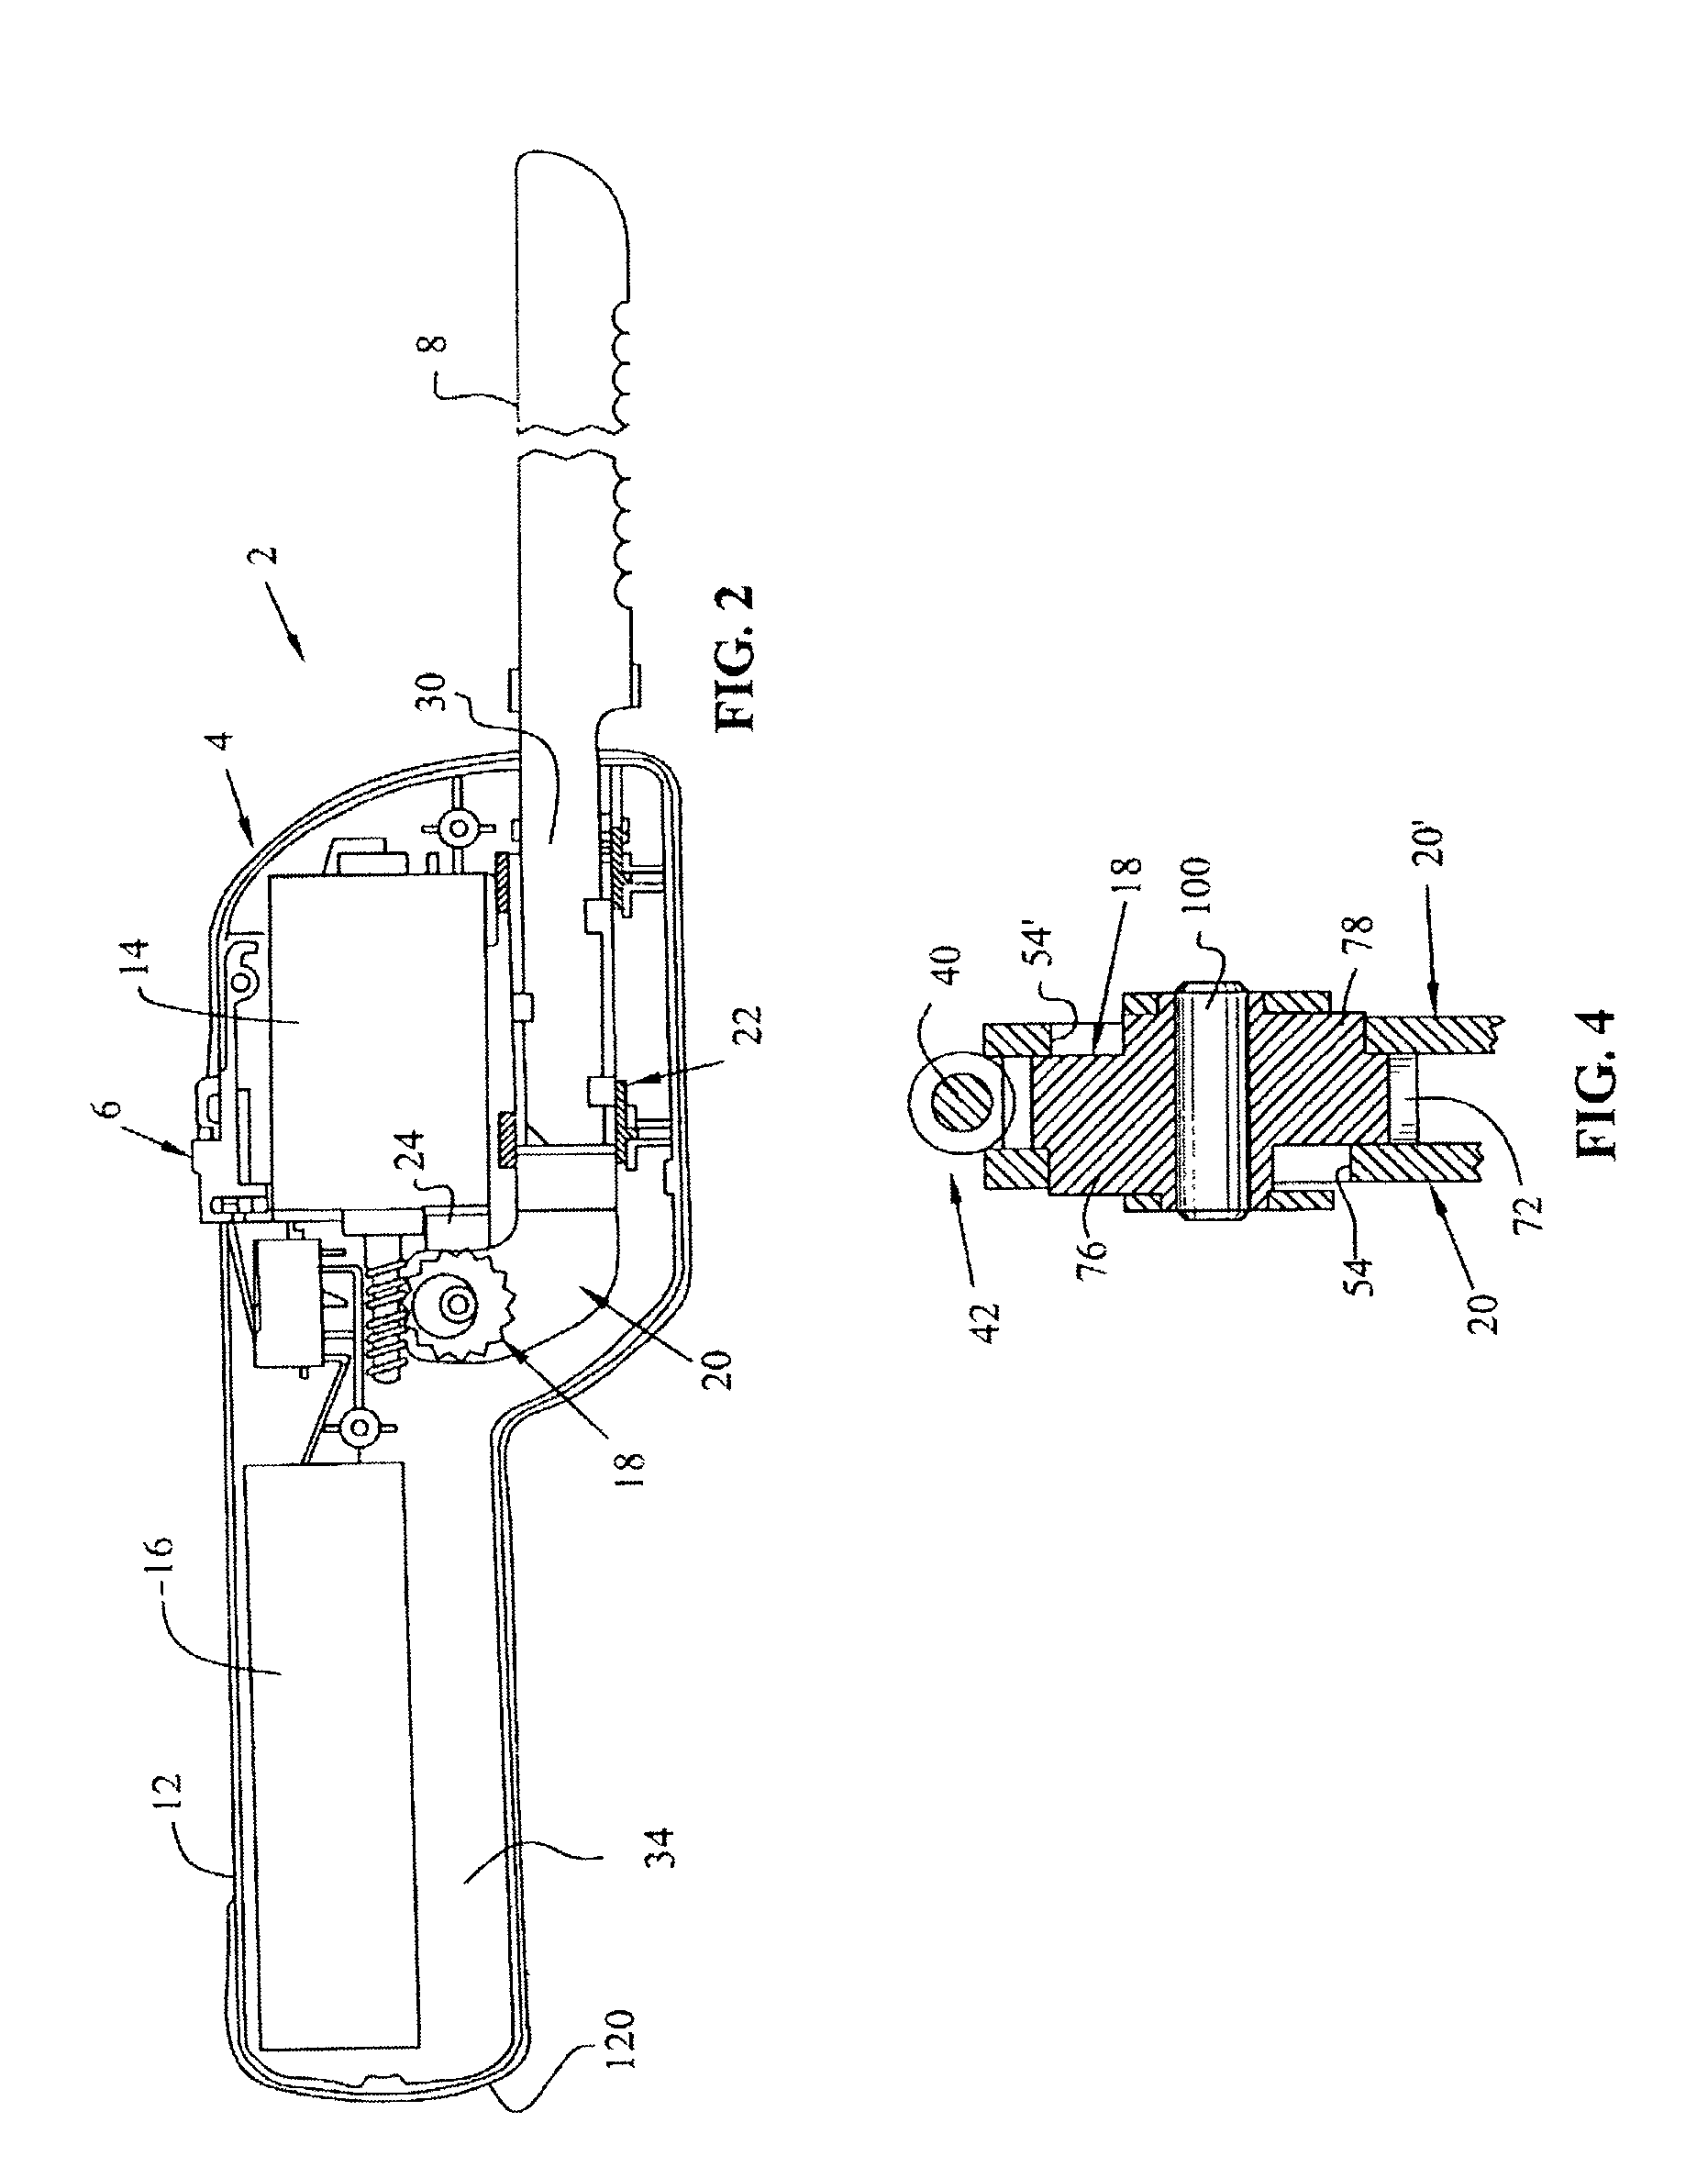 Battery-powered carving knife having a rechargeable battery pack